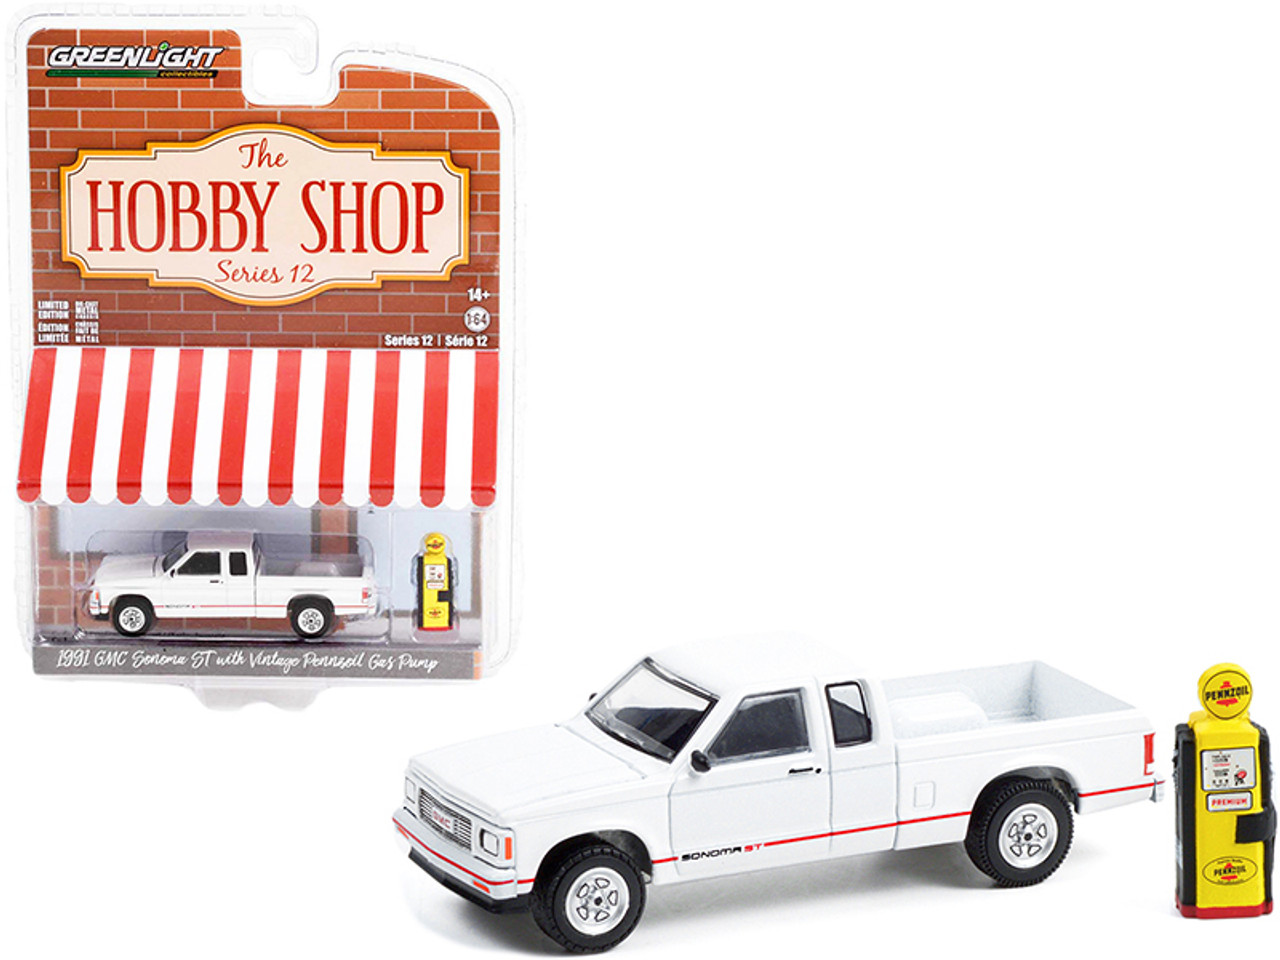 1991 GMC Sonoma ST Pickup Truck White and Vintage "Pennzoil" Gas Pump "The Hobby Shop" Series 12 1/64 Diecast Model Car by Greenlight